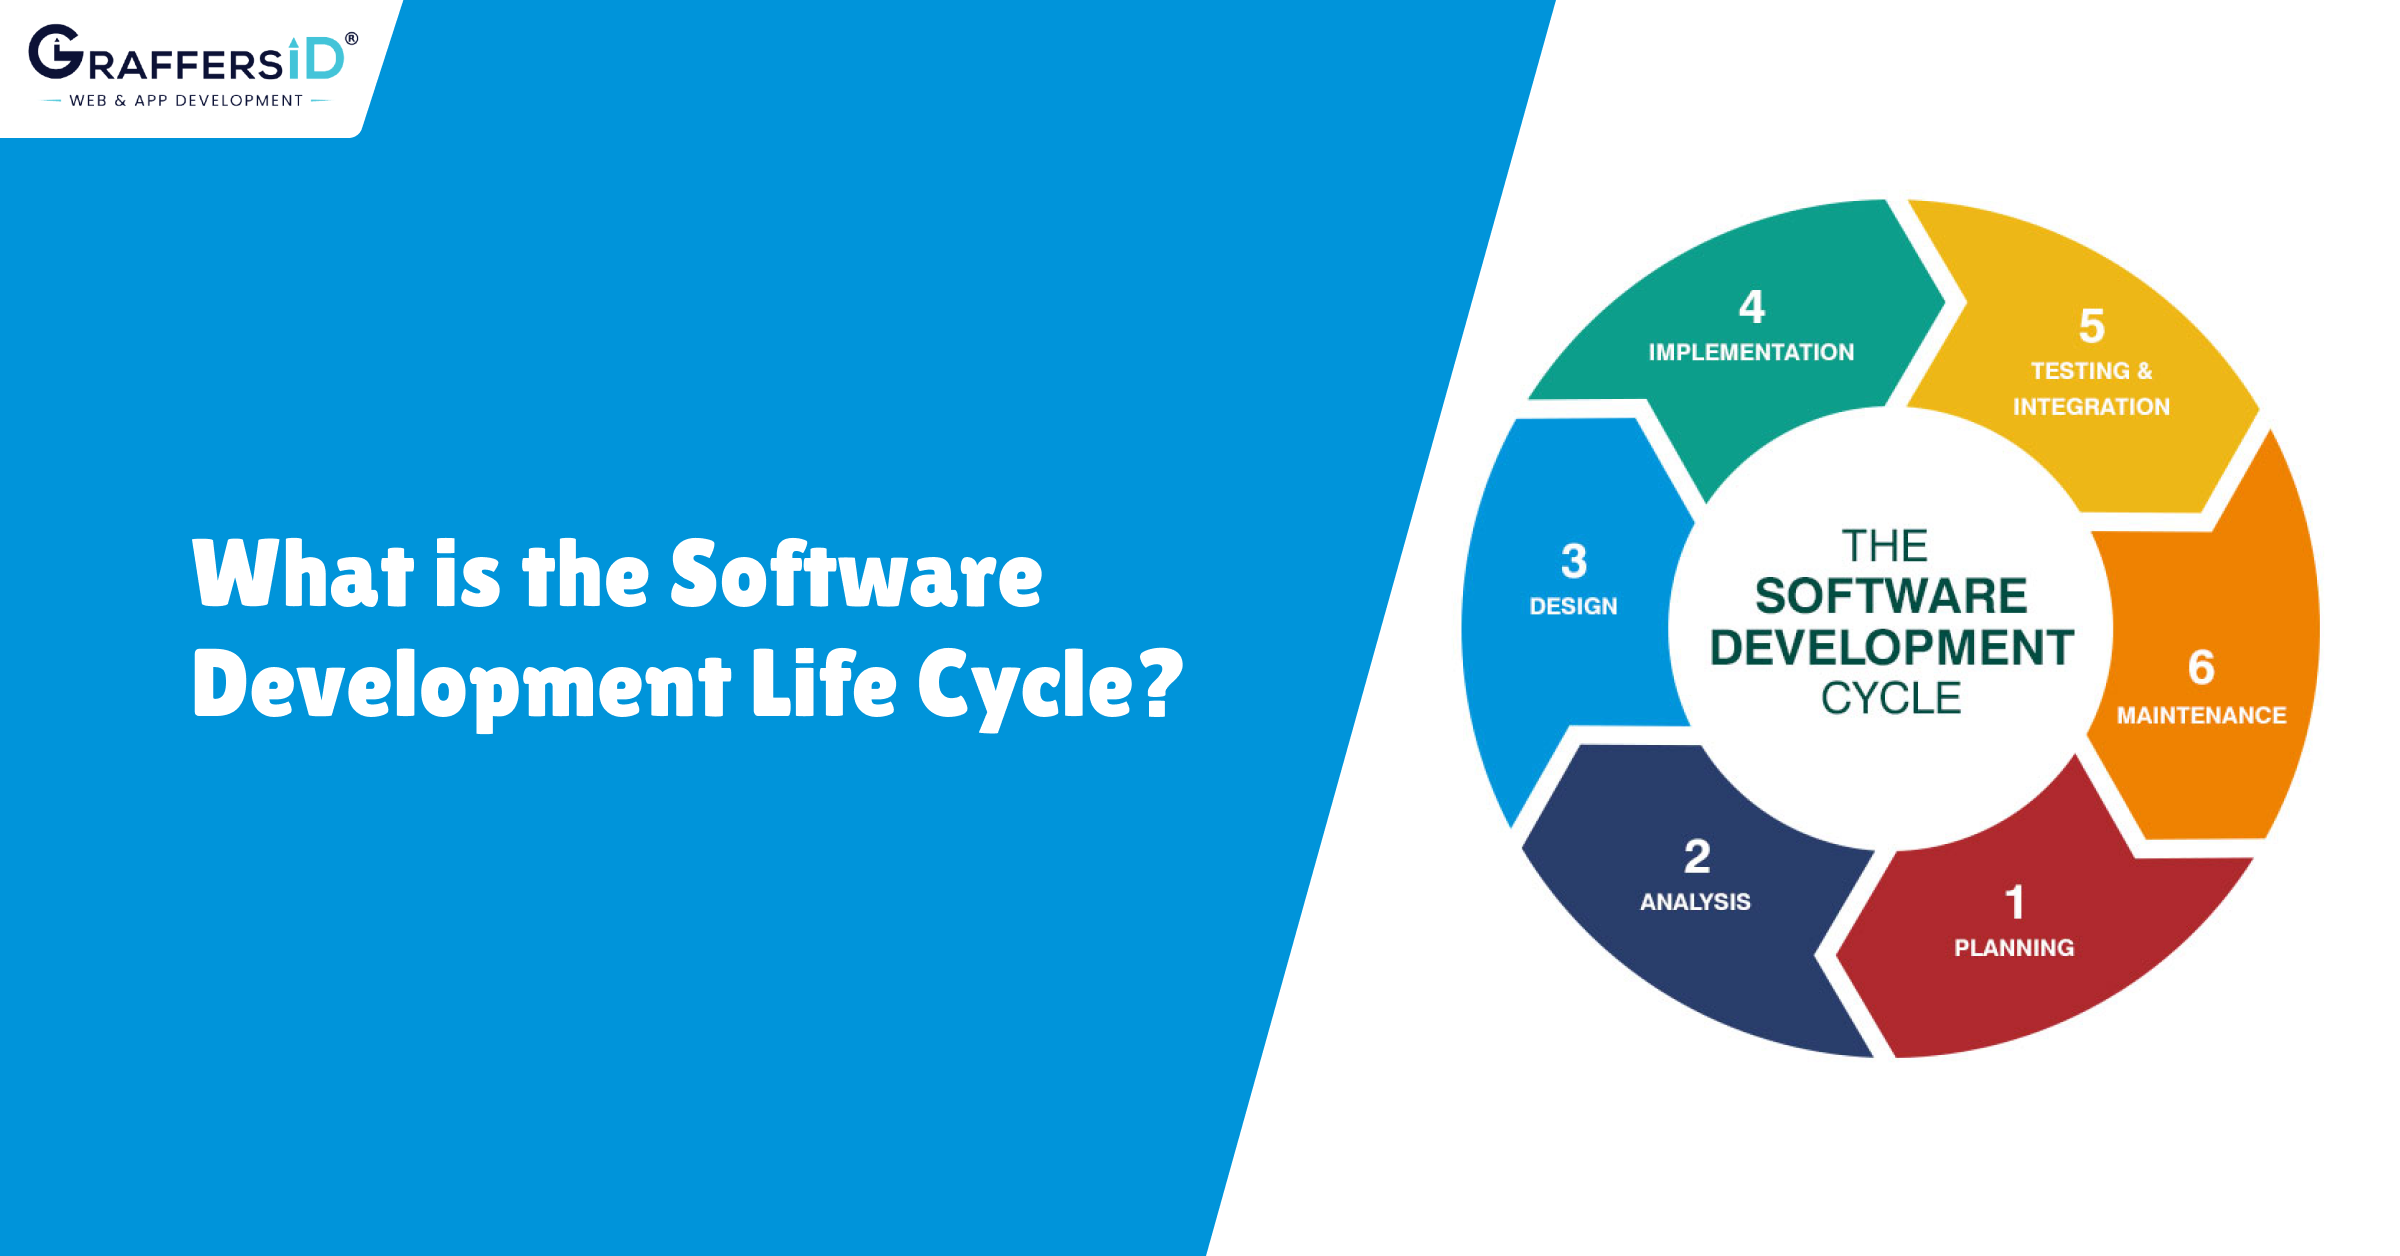 What is the Software Development Life Cycle?